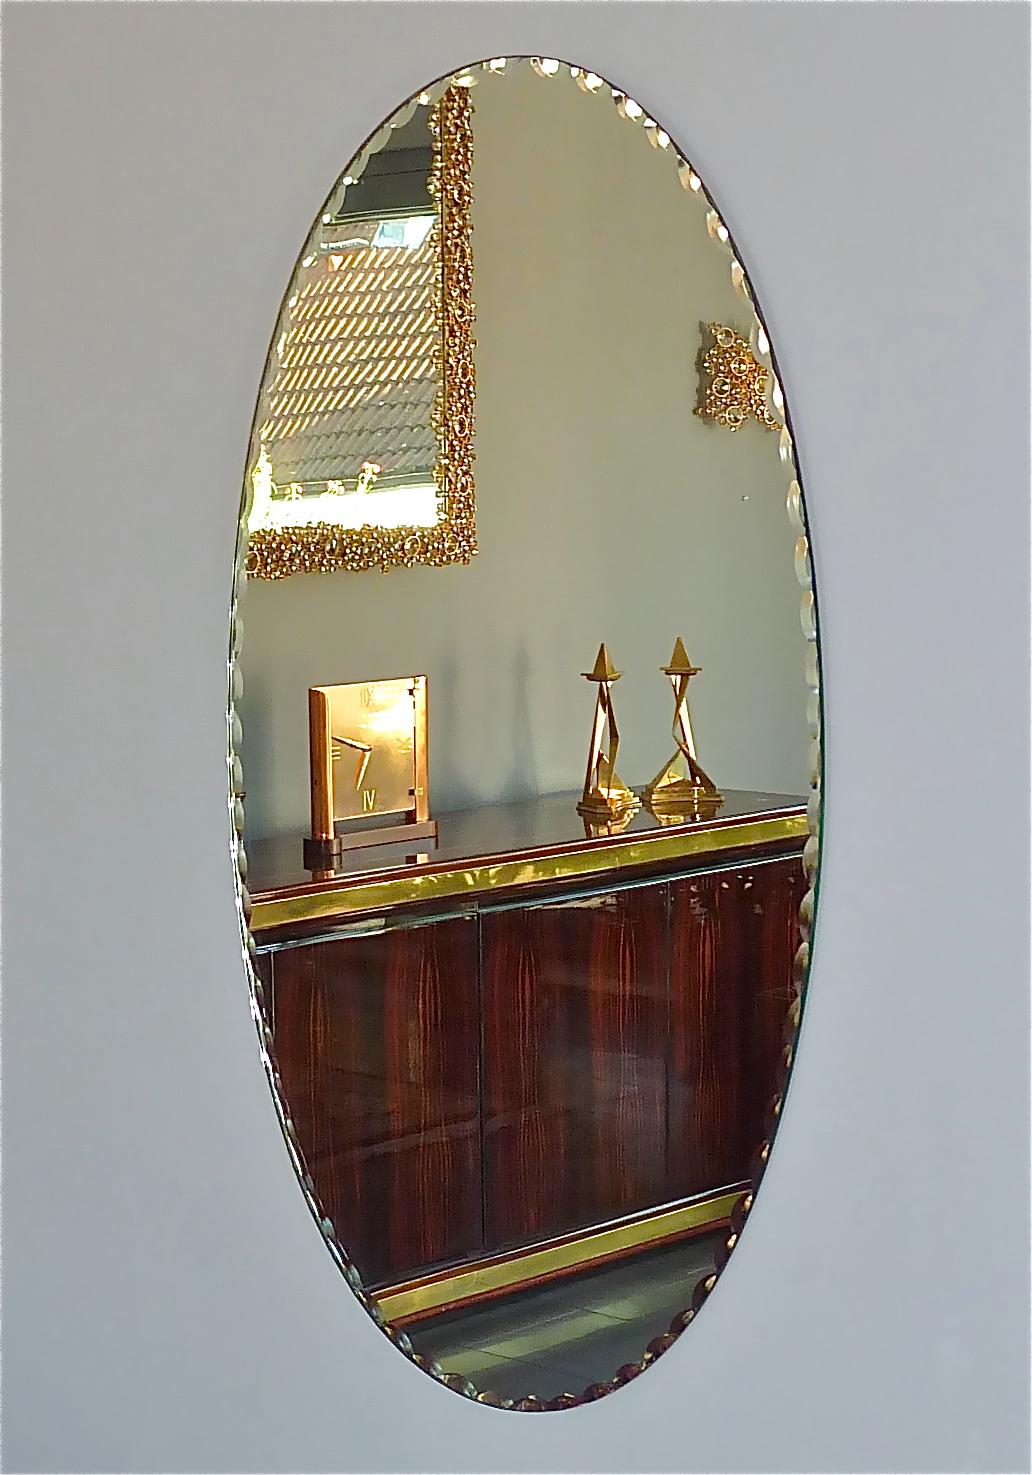 Rare large pair of Italian Midcentury oval mirrors with faceted crystal glass and attribution to Fontana Arte or Cristal Arte, Italy around 1950s. The reverse with cardboard and patinated brass hangers for vertical or horizontal installation. The